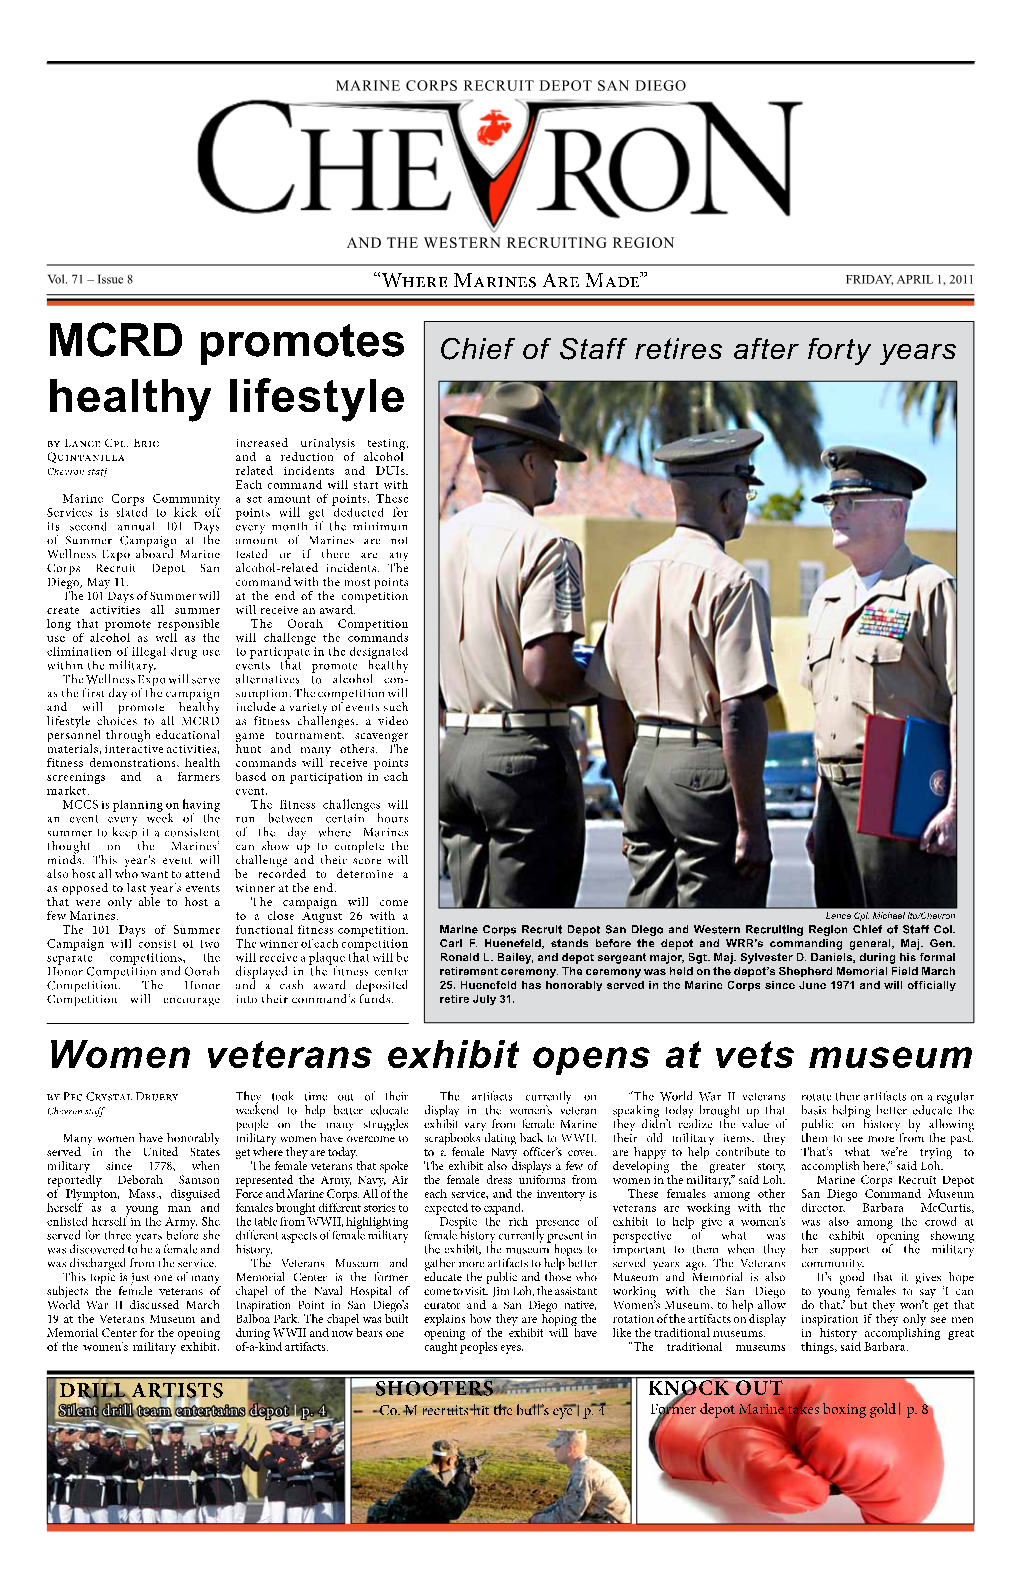 MCRD Promotes Healthy Lifestyle